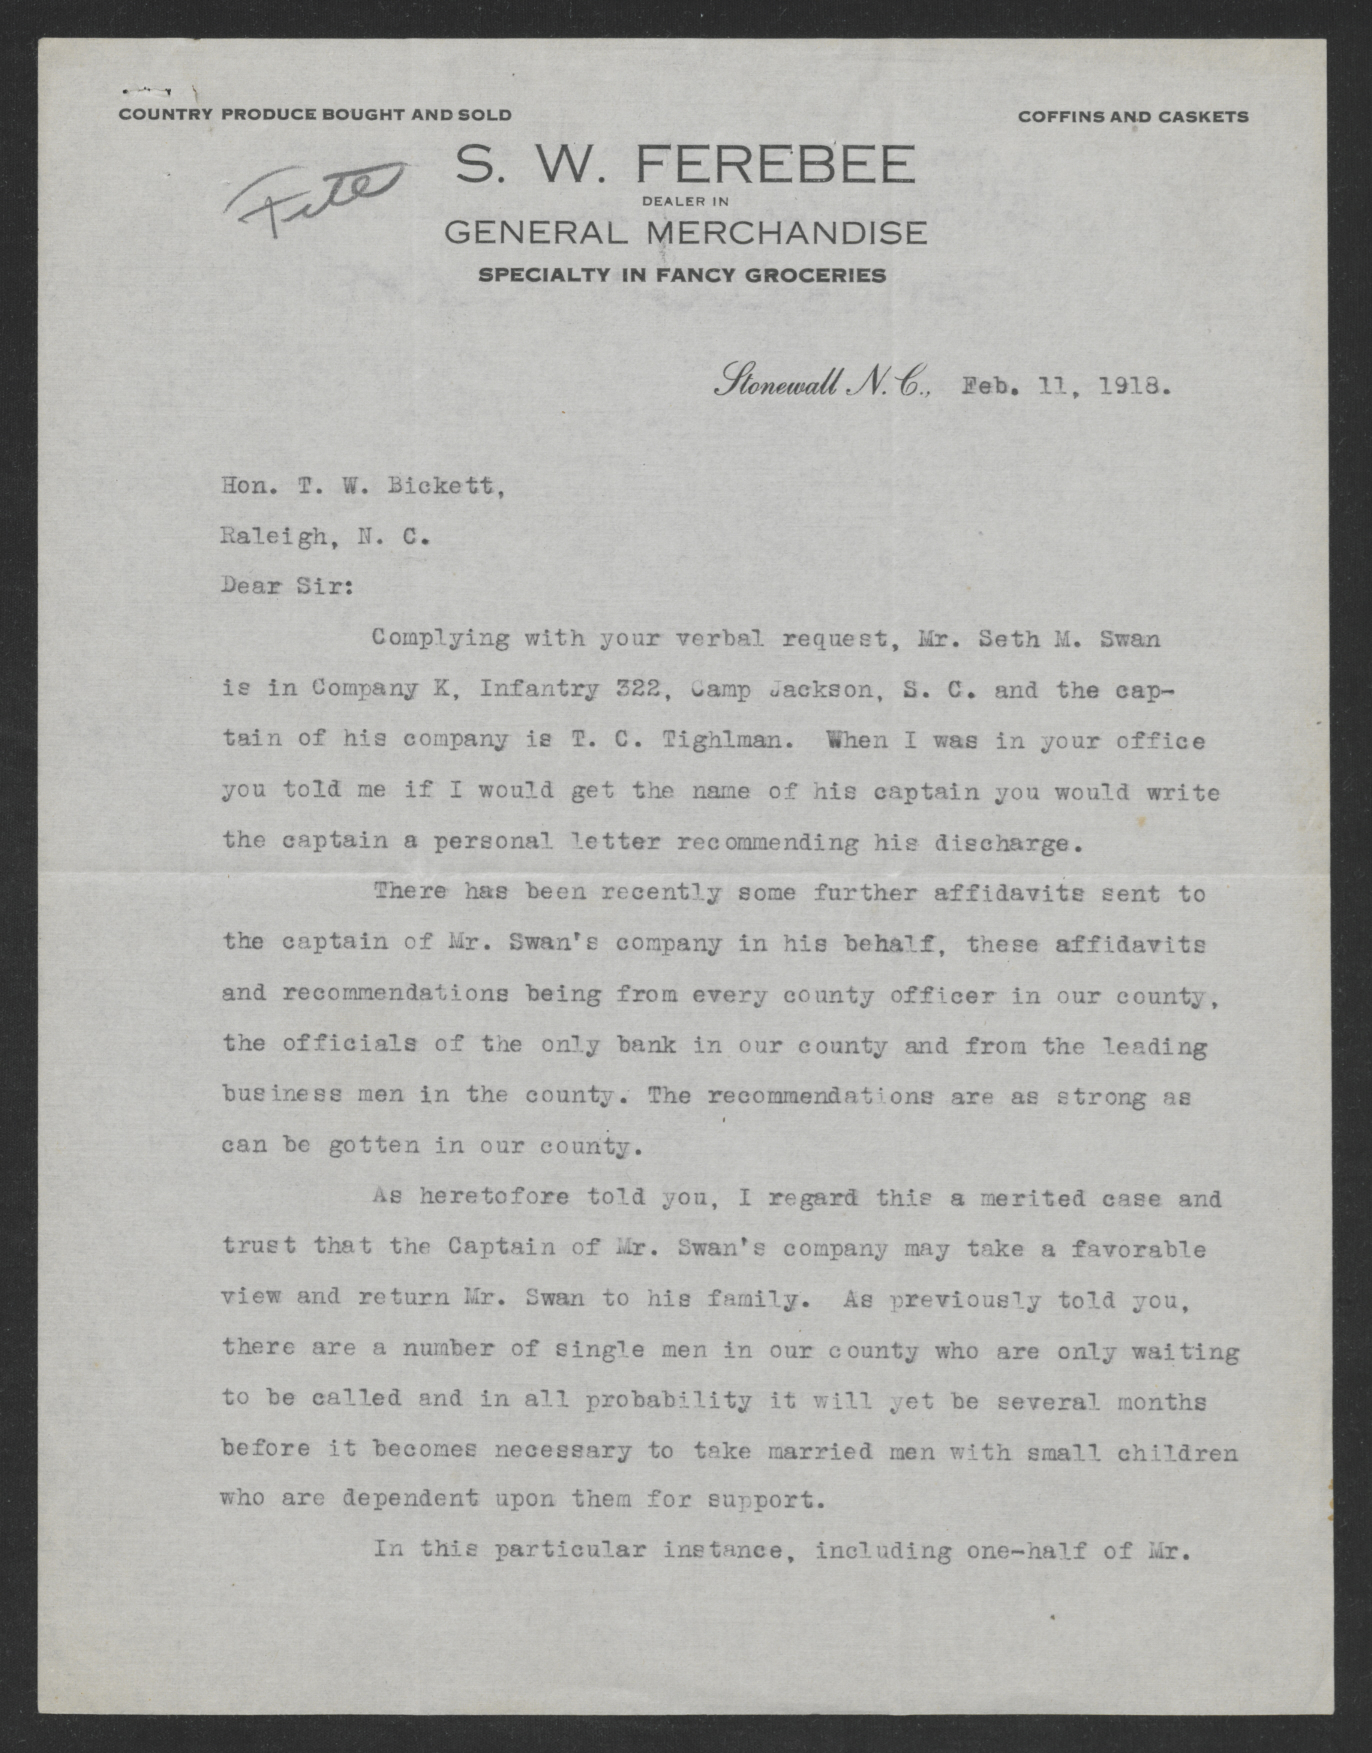 Letter from Samuel W. Ferebee to Thomas W. Bickett, February 11, 1918, page 1